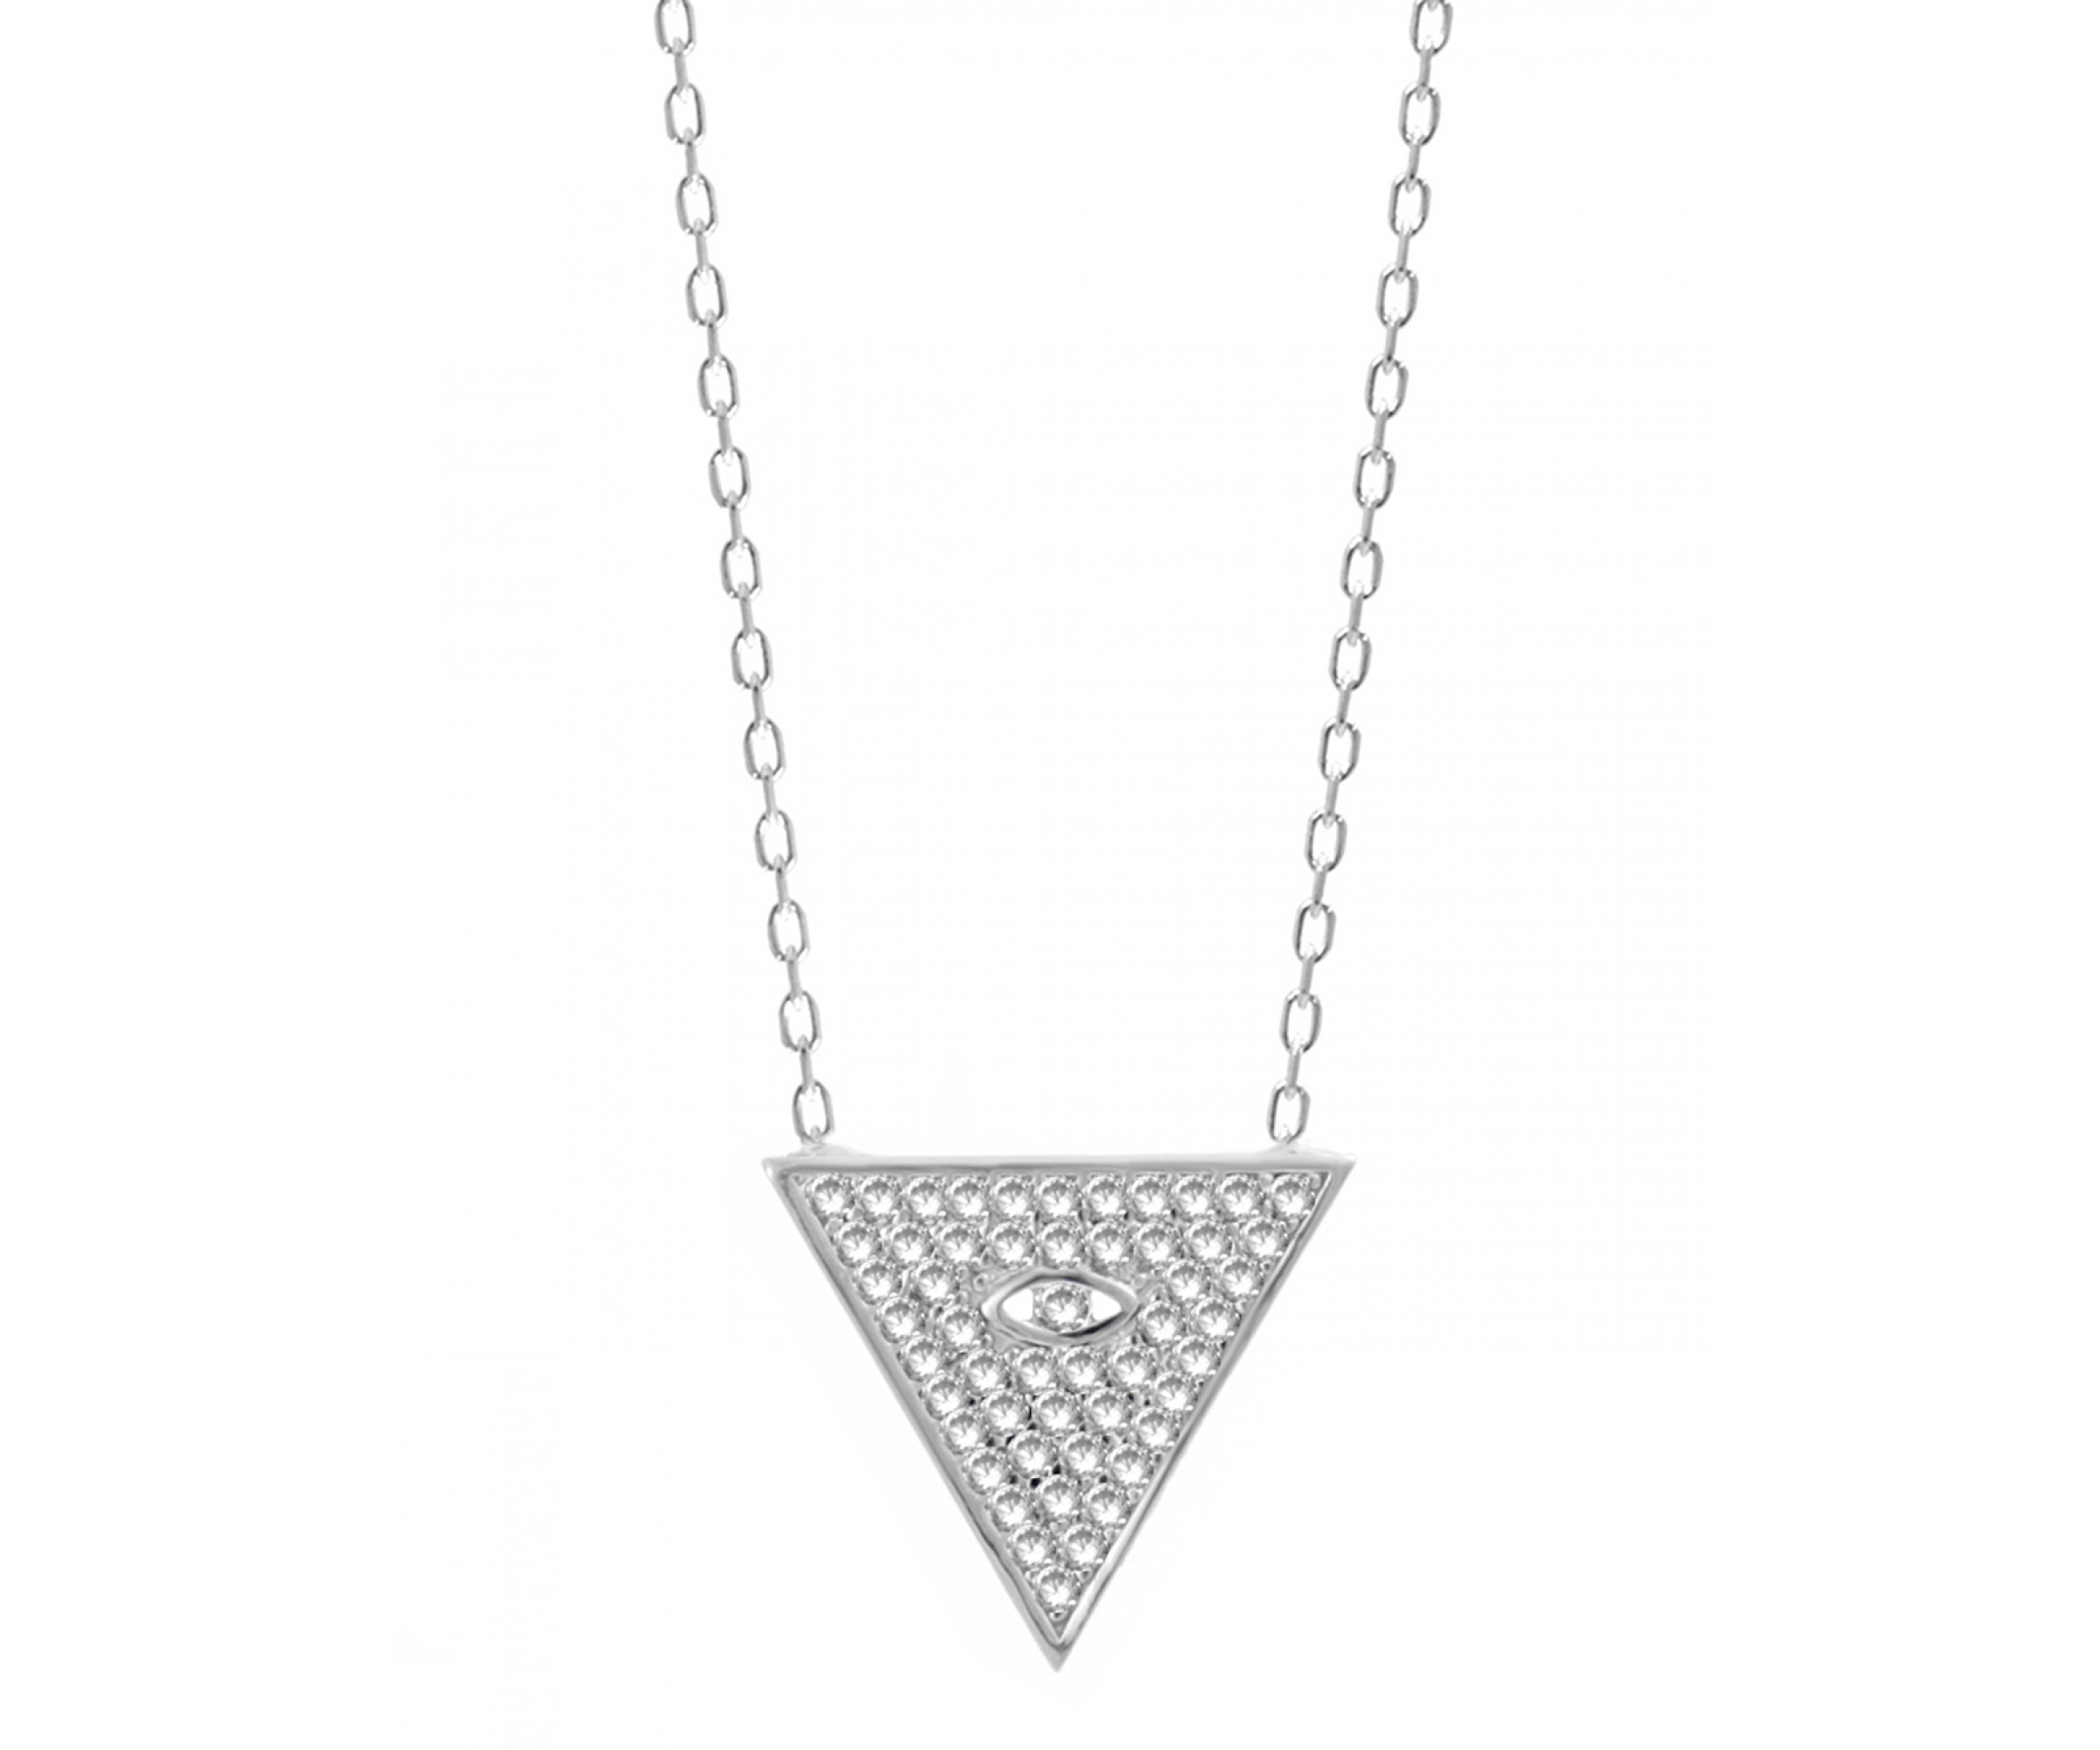 Buy Inspired Pyramid Necklace with All seeing Eye in Silver ...